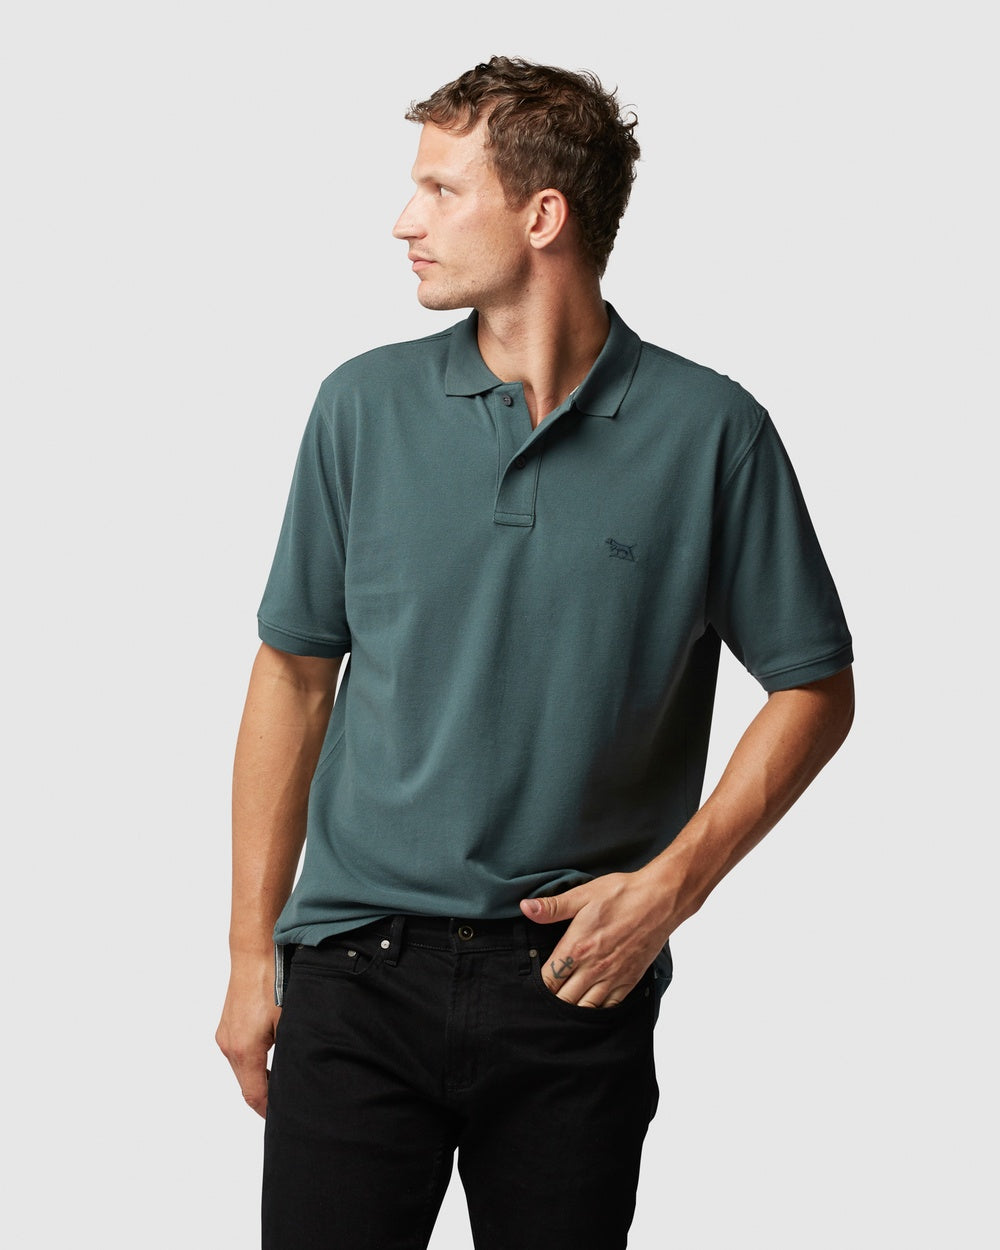 A favourite Polo in Vine Green. Perfect pairing with either your new pants or shorts.